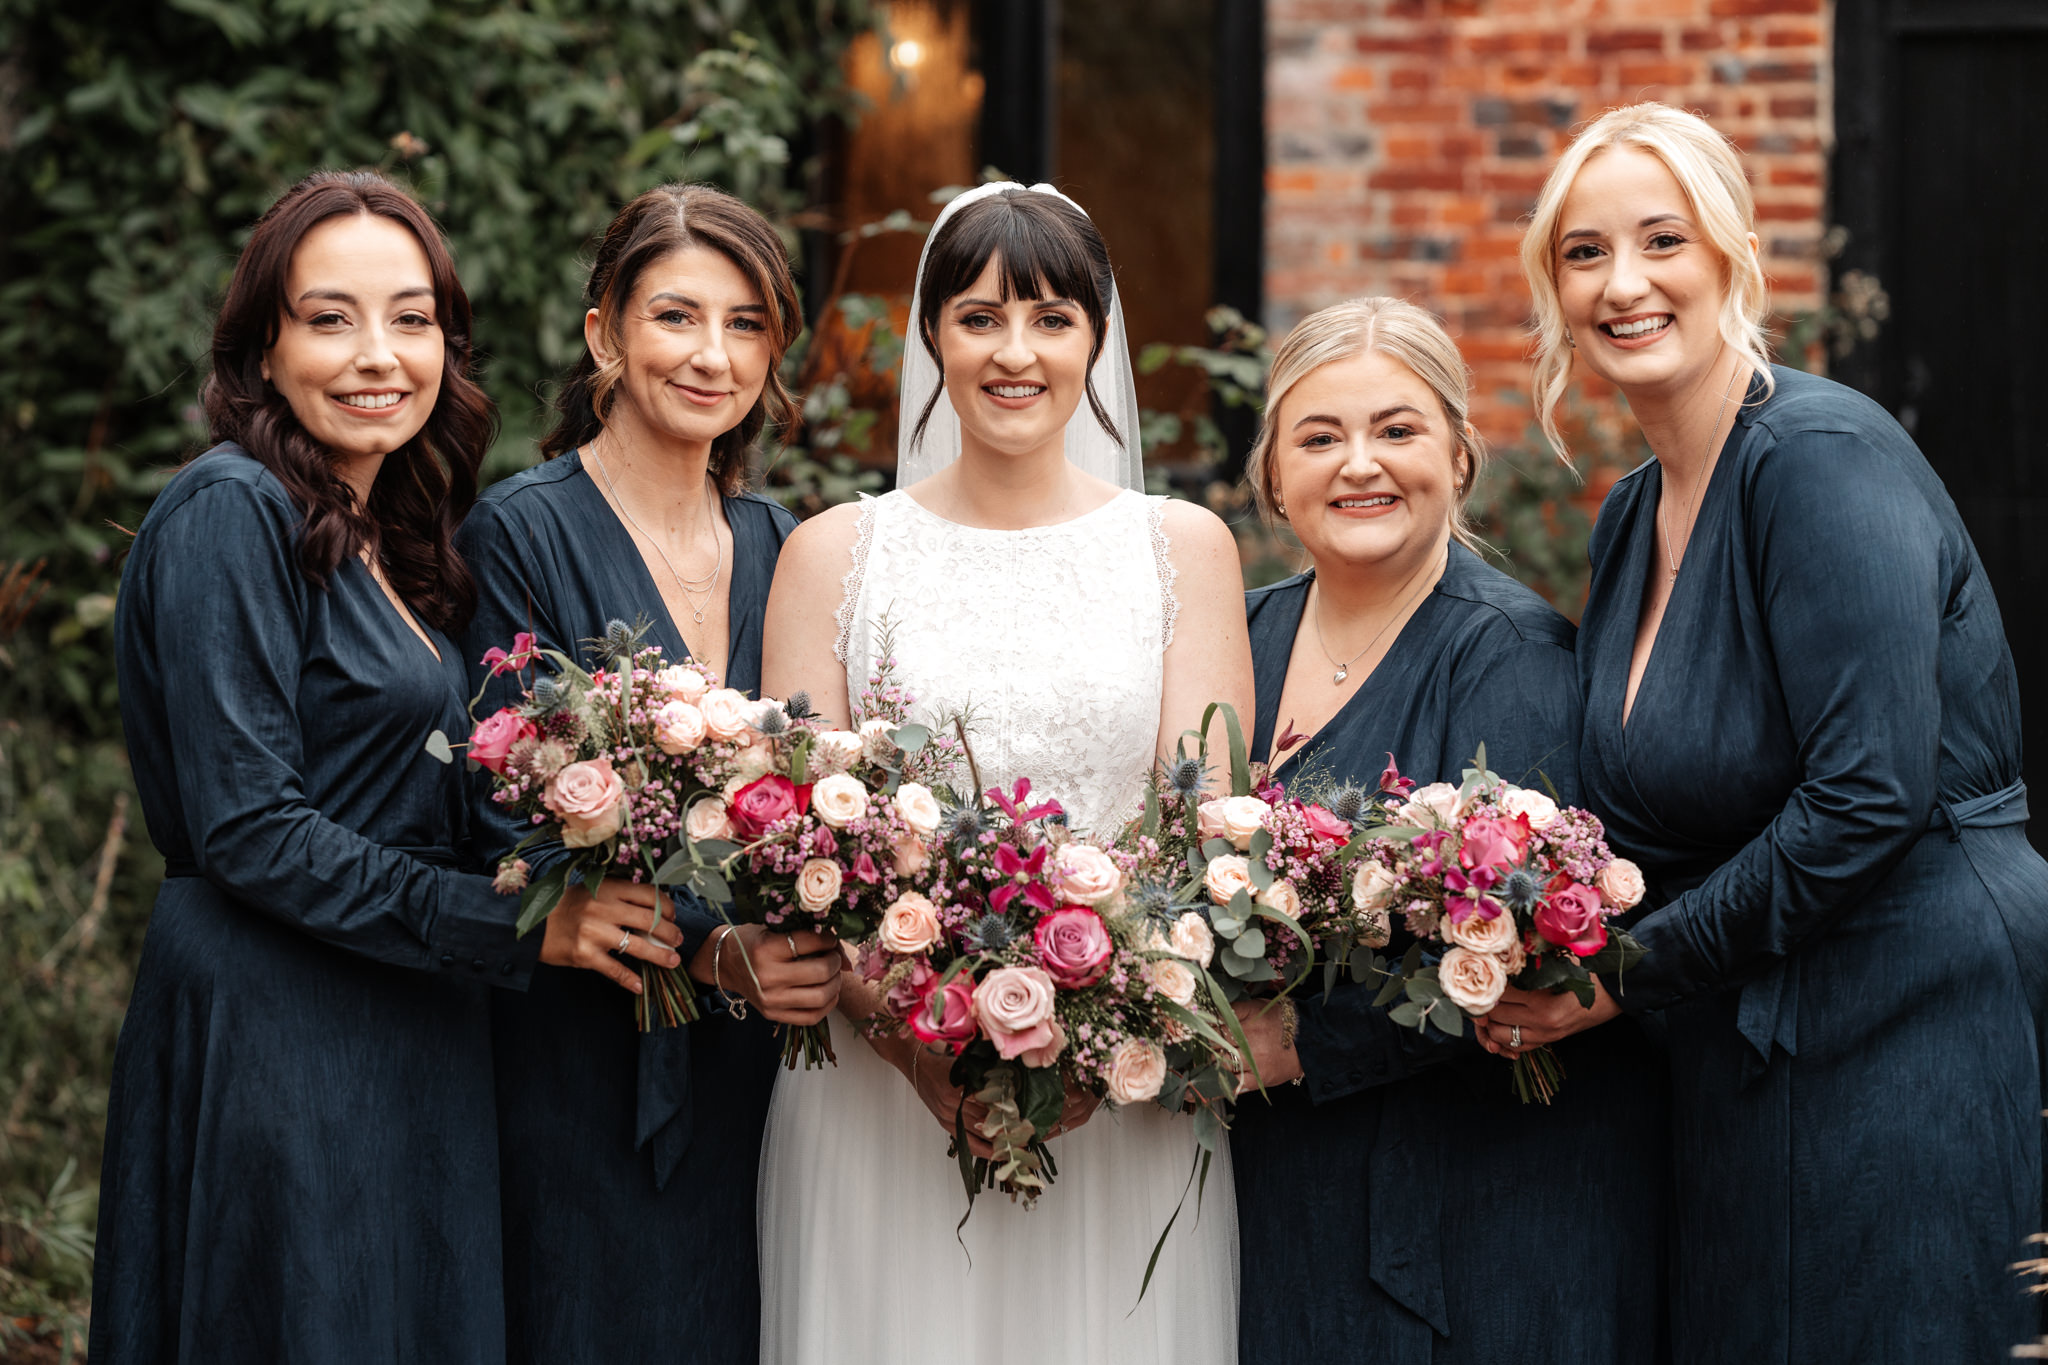 clock barn wedding with group photo of bridesmaids and bride